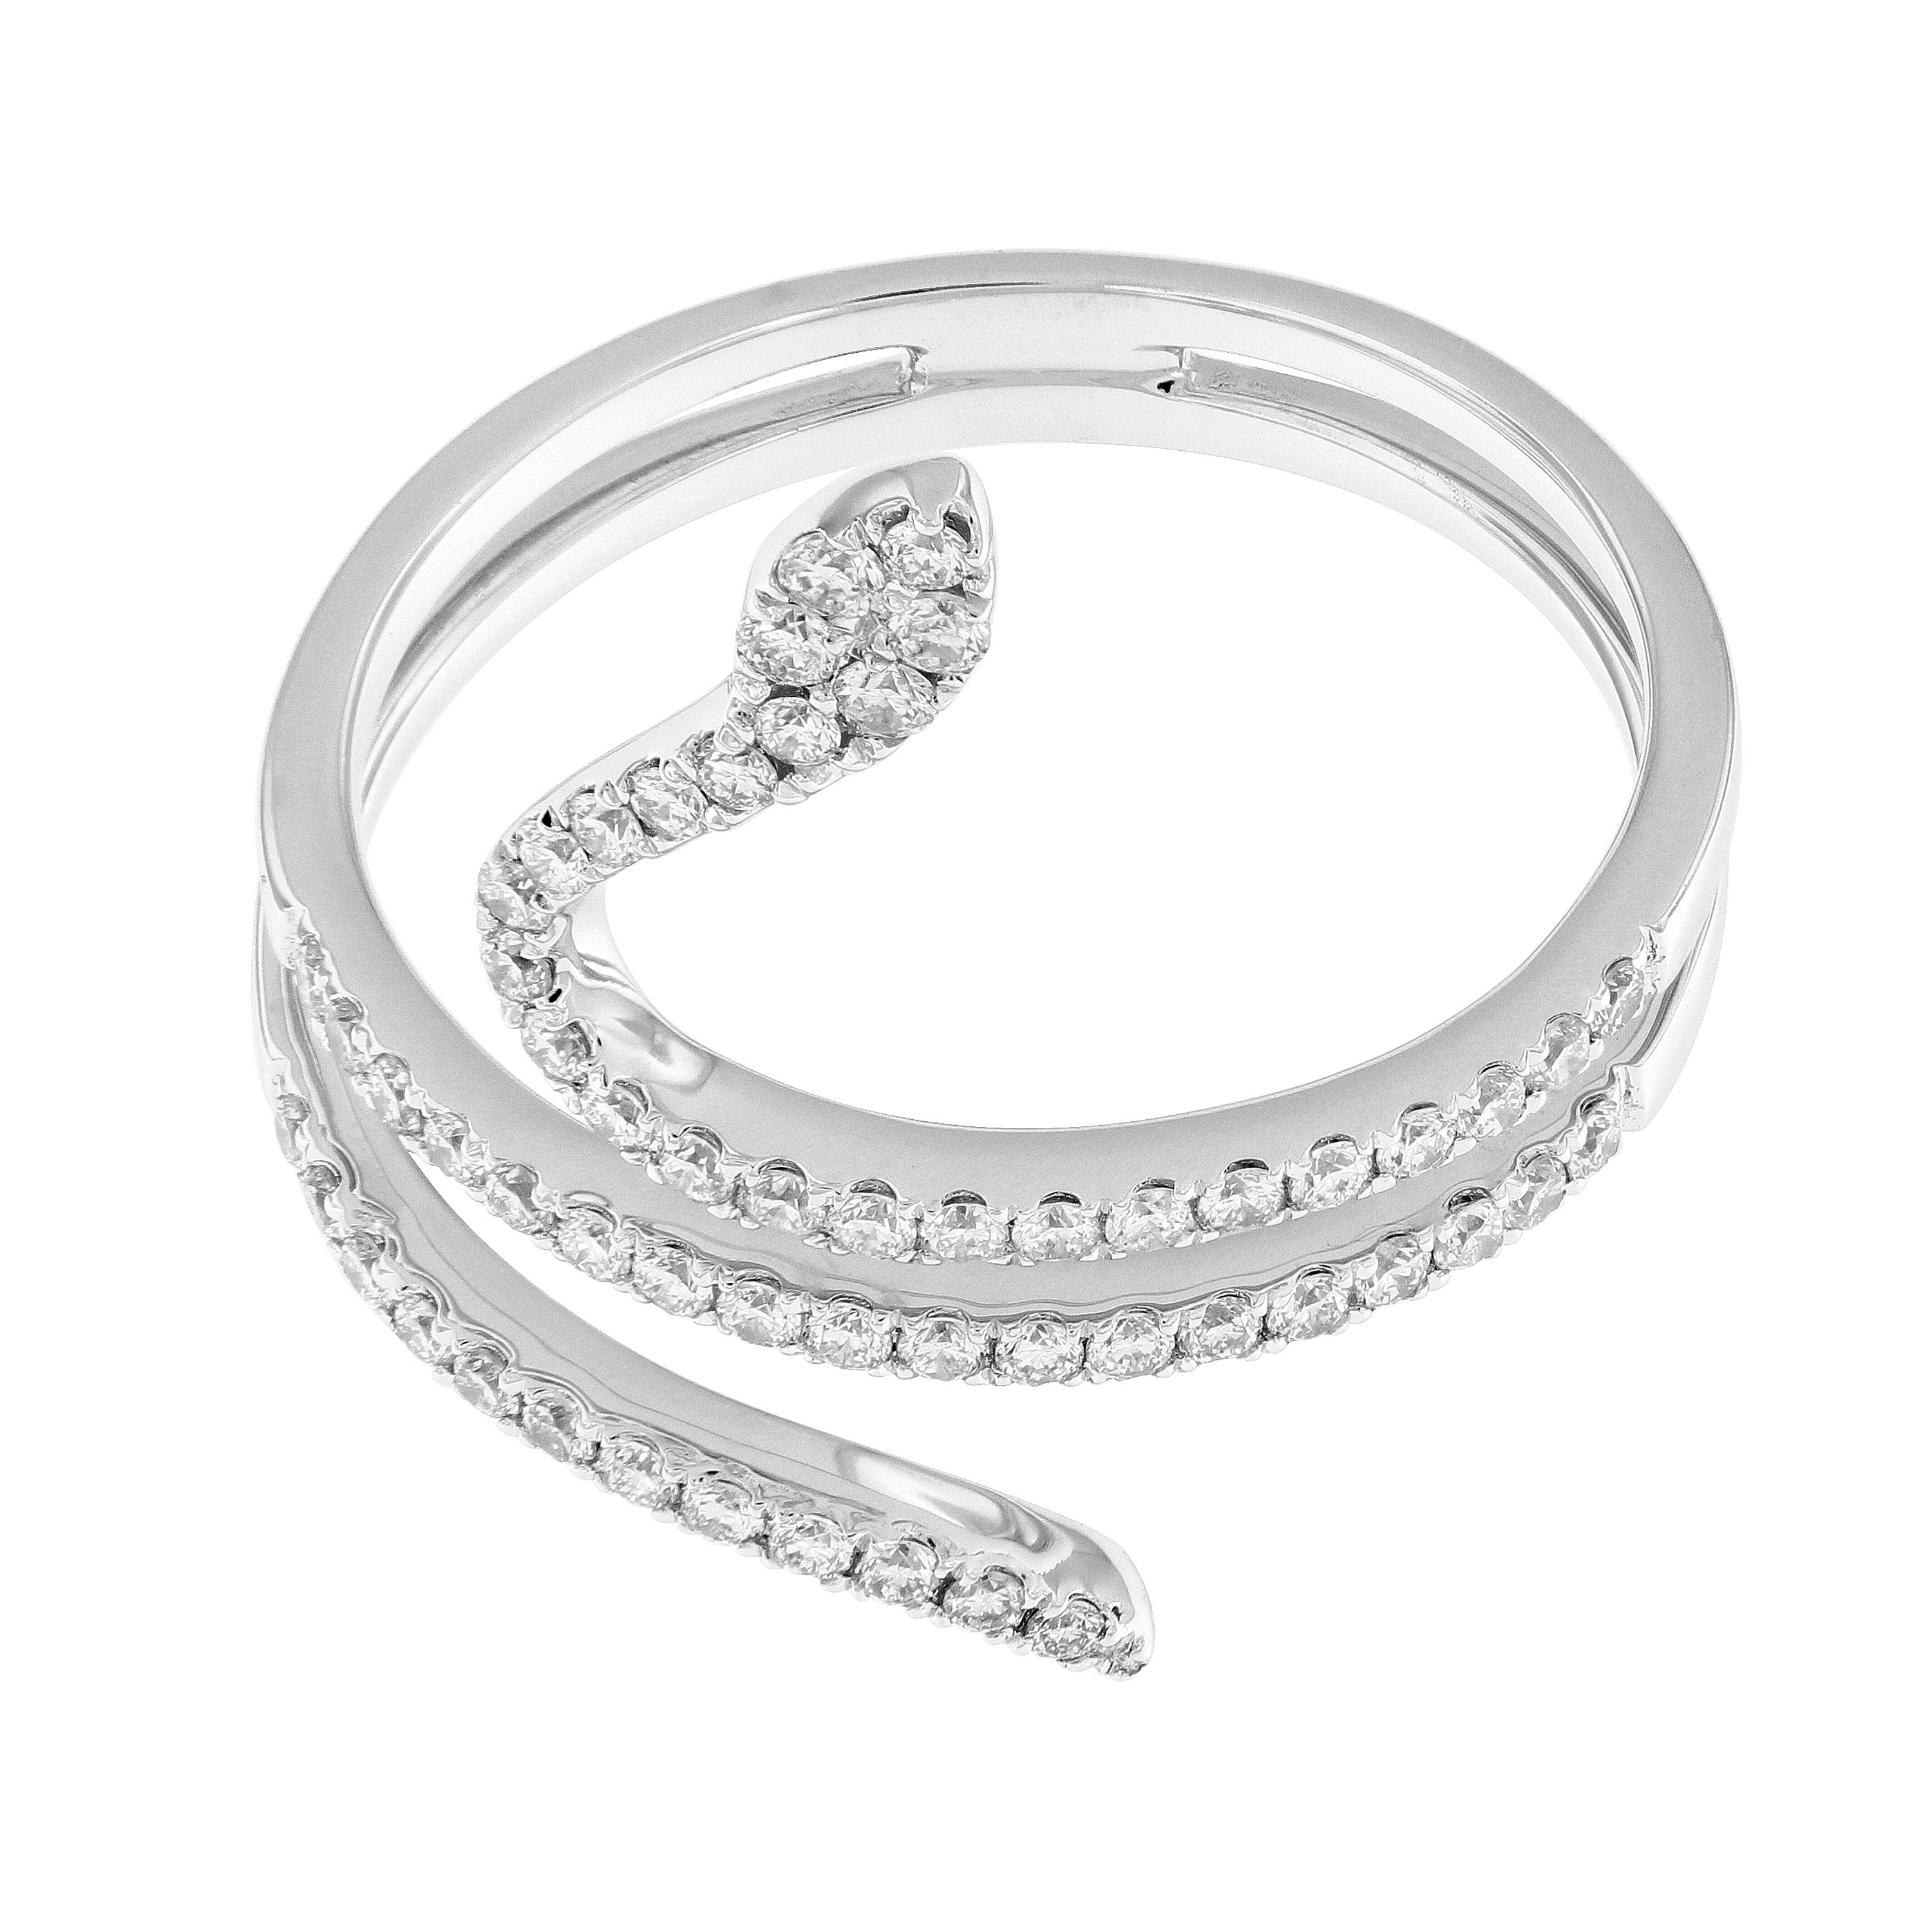 This contemporary serpent ring beautifully wraps around your finger and is crafted in 18 karat fine white gold. Featuring 56 round brilliant cut diamonds = 0.39 Cttw. Ring is a size 6.5 but can be sized. 

Diamonds 0.39 cttw, VS-SI, G-H